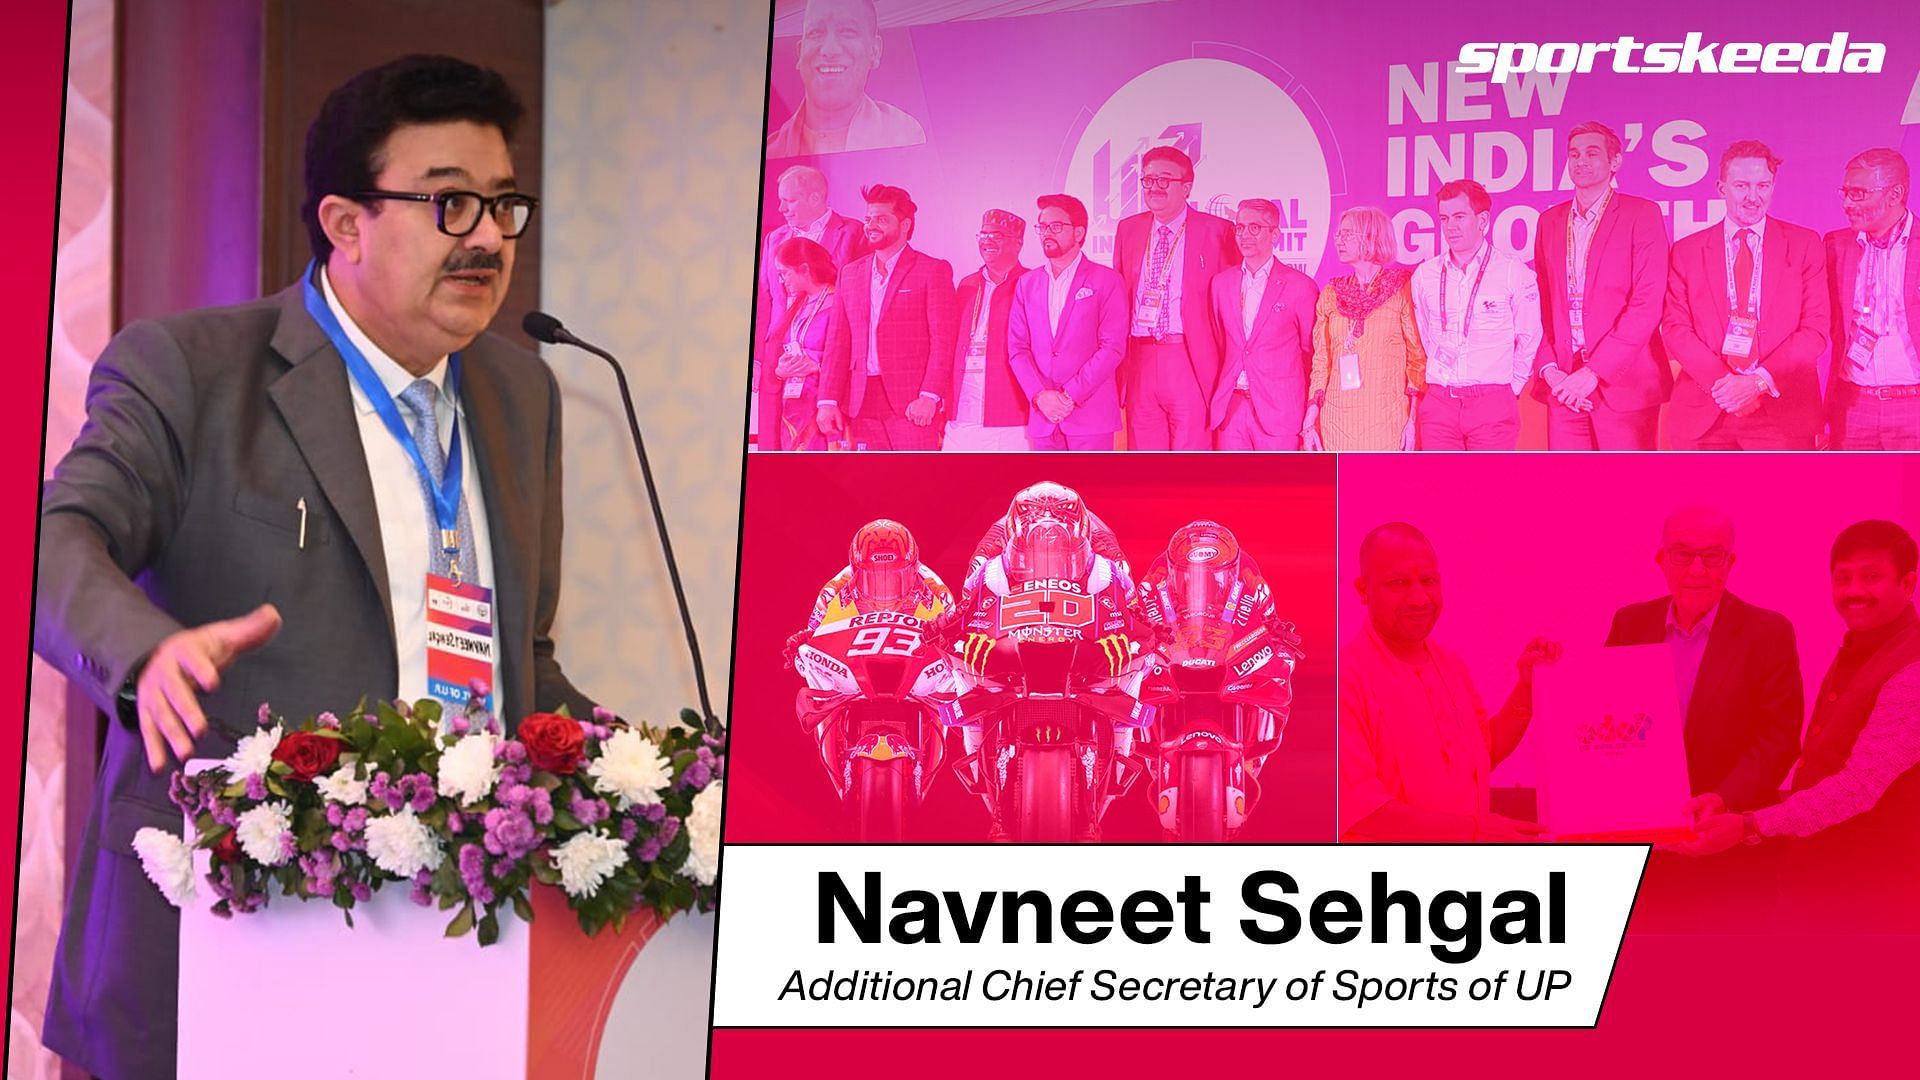 Navneet Sehgal, Additional Chief Secretary, Sports, UP